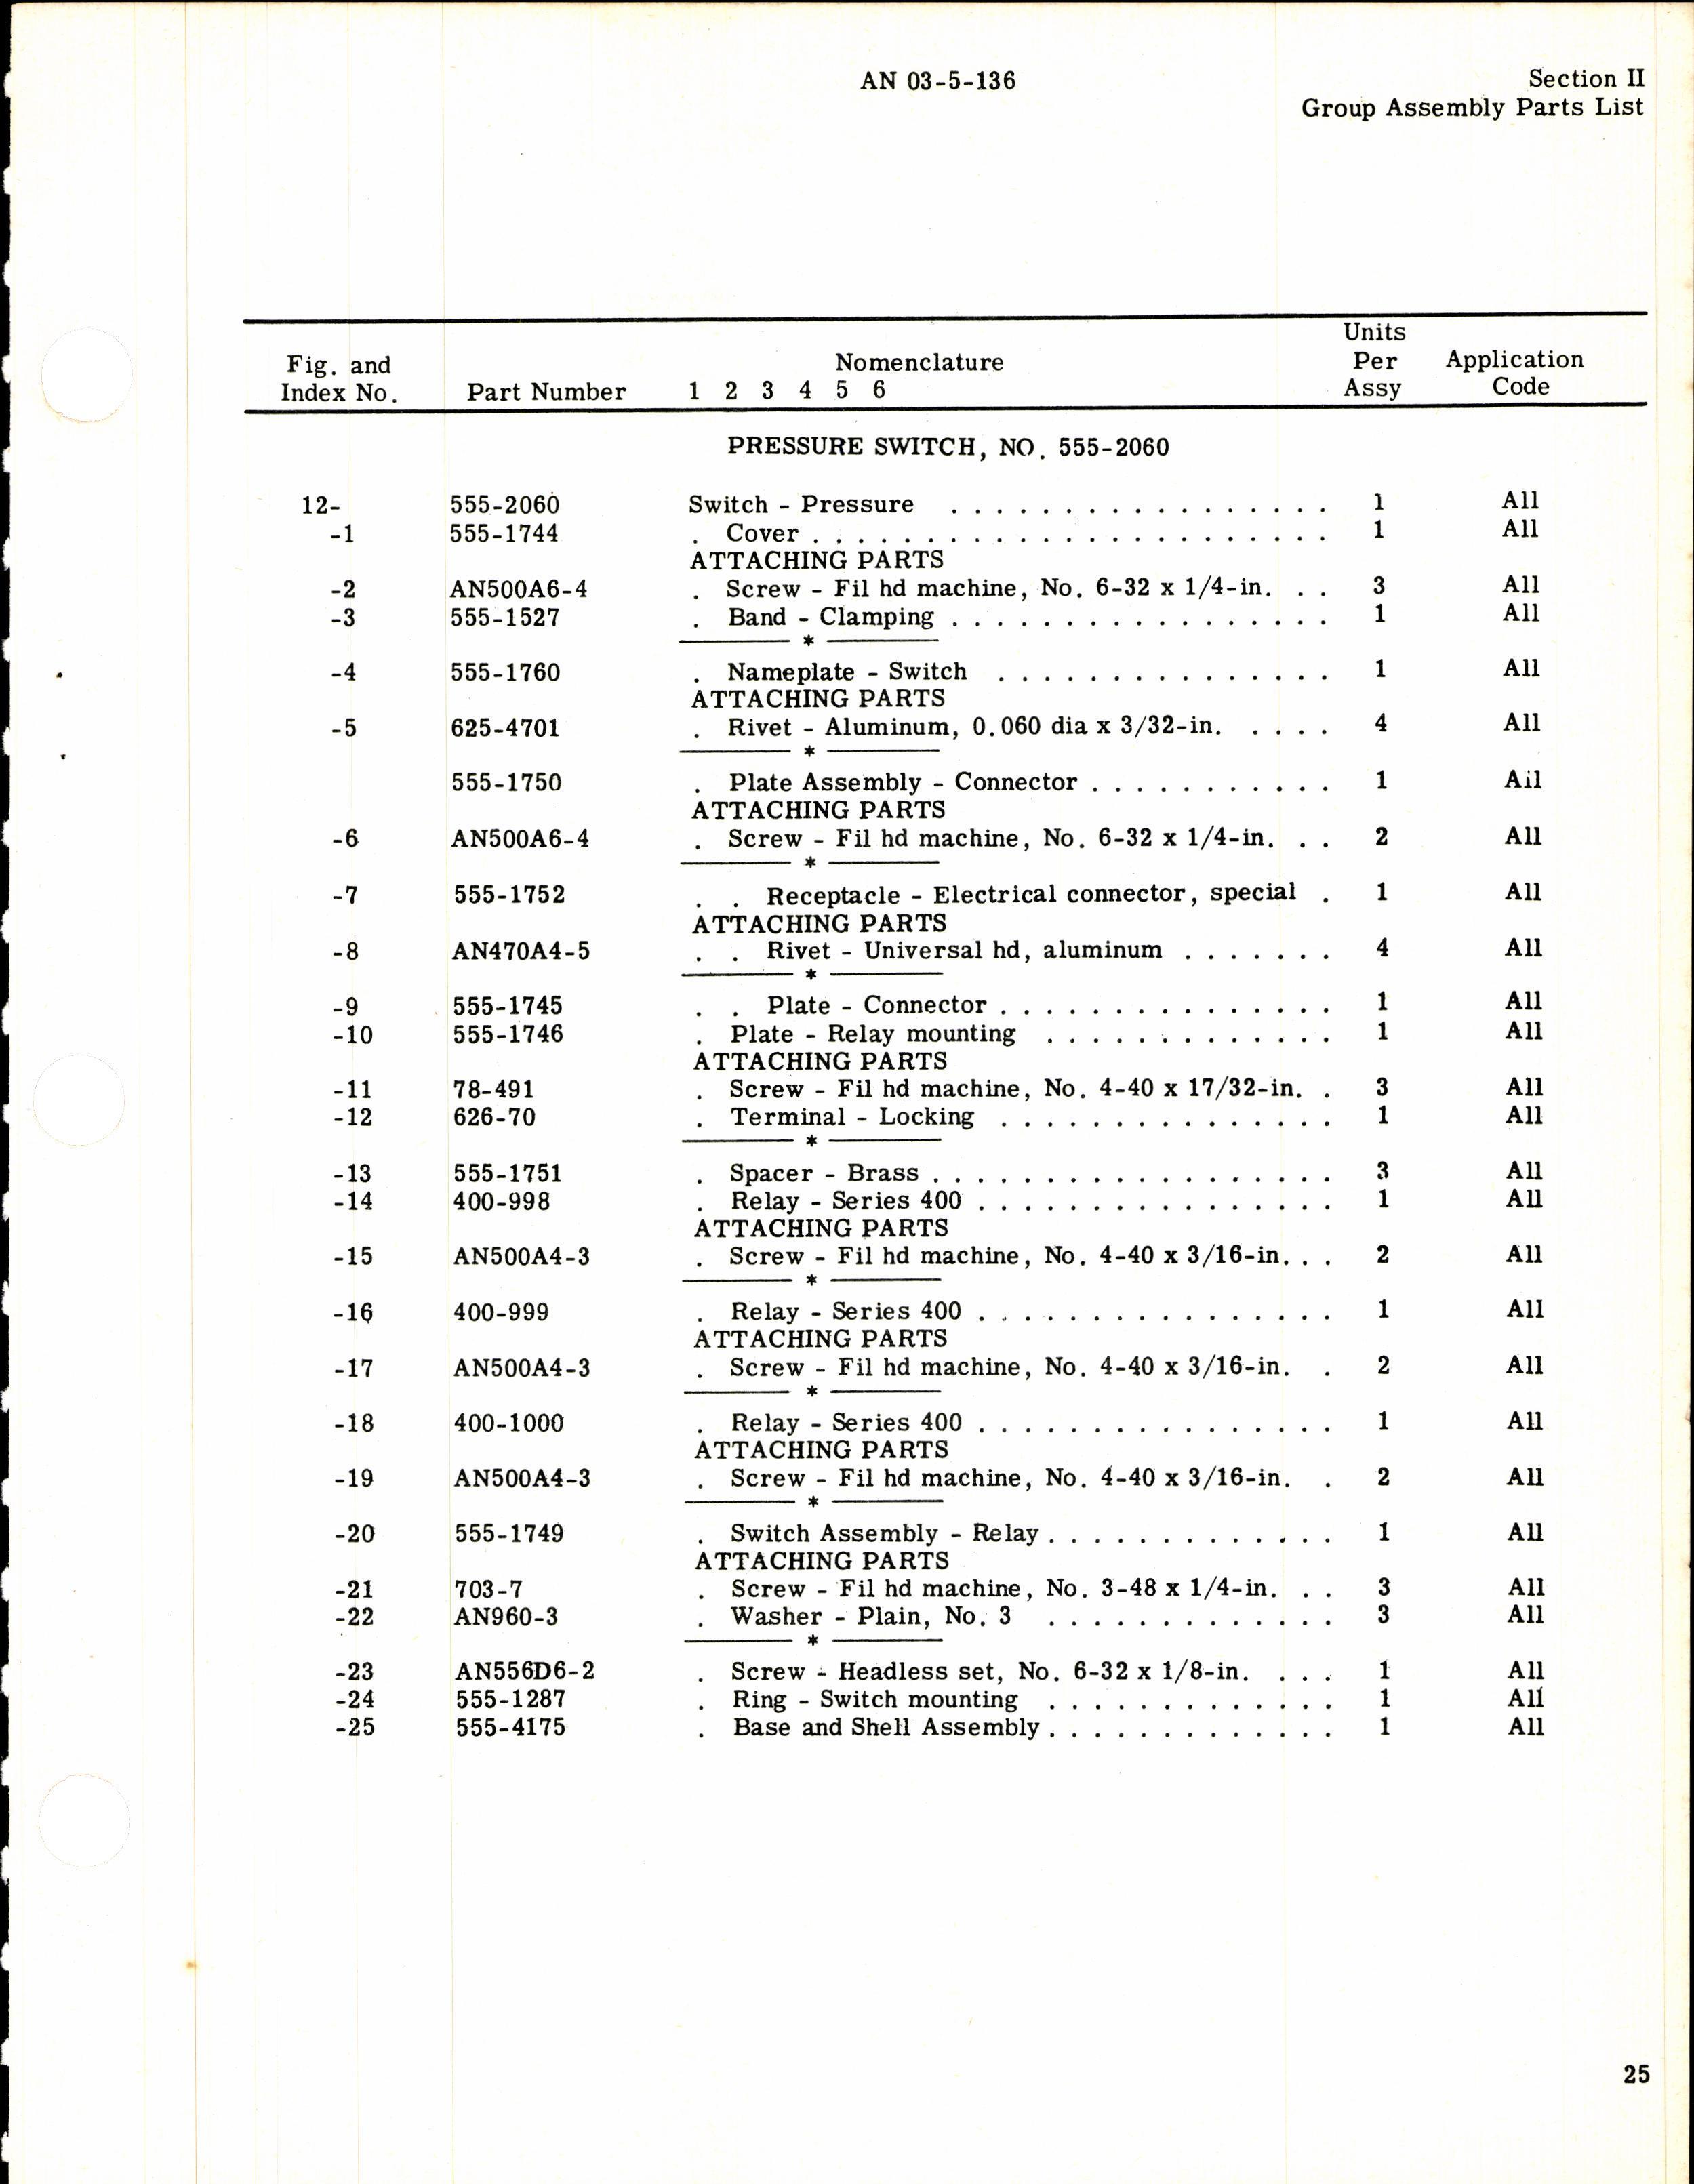 Sample page 5 from AirCorps Library document: Parts Catalog for Cook Pressure Control Switches